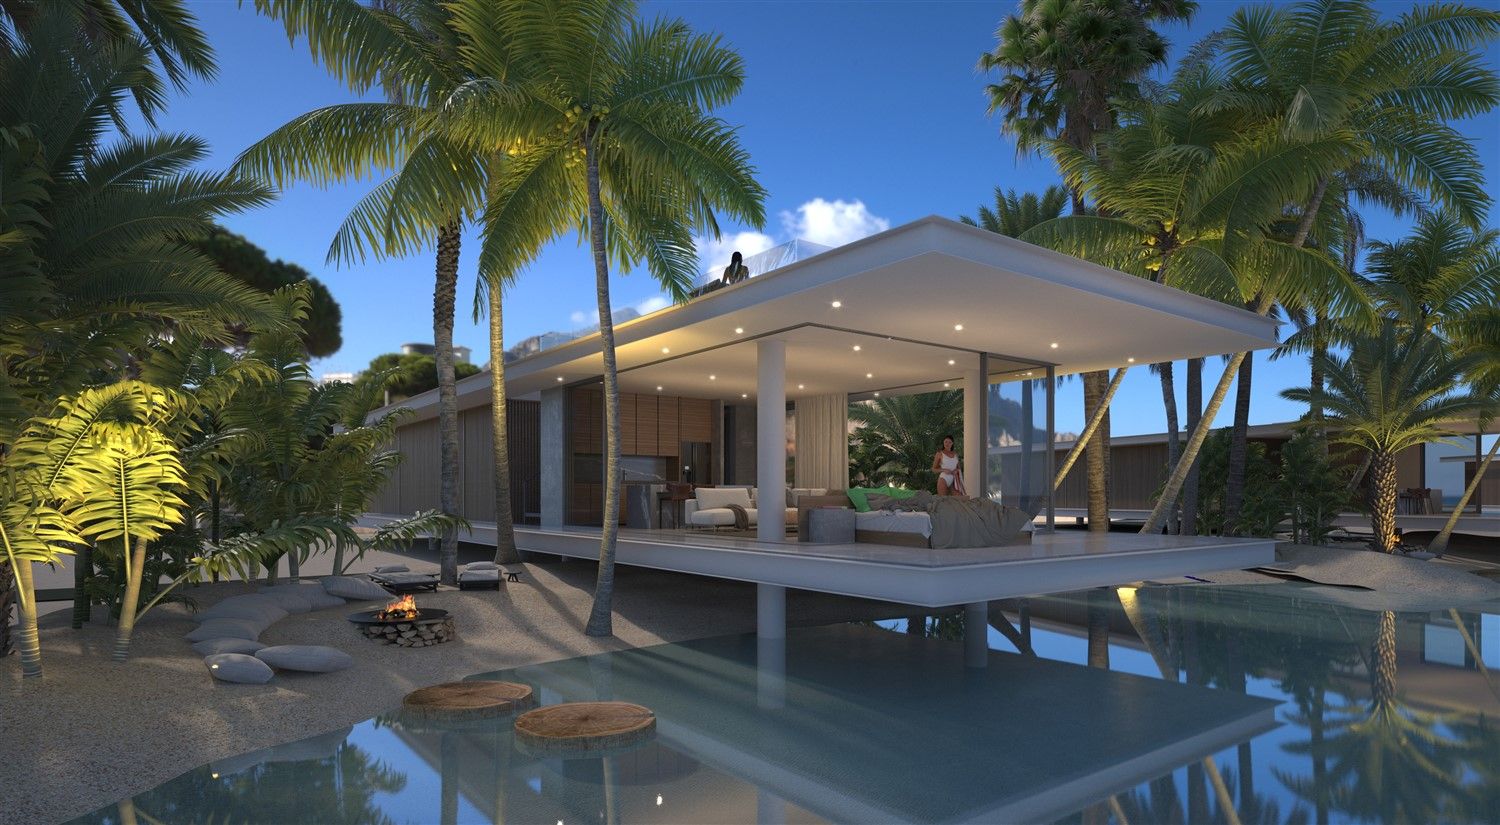 Luxury 3+1 bungalows with their own private artificial beaches